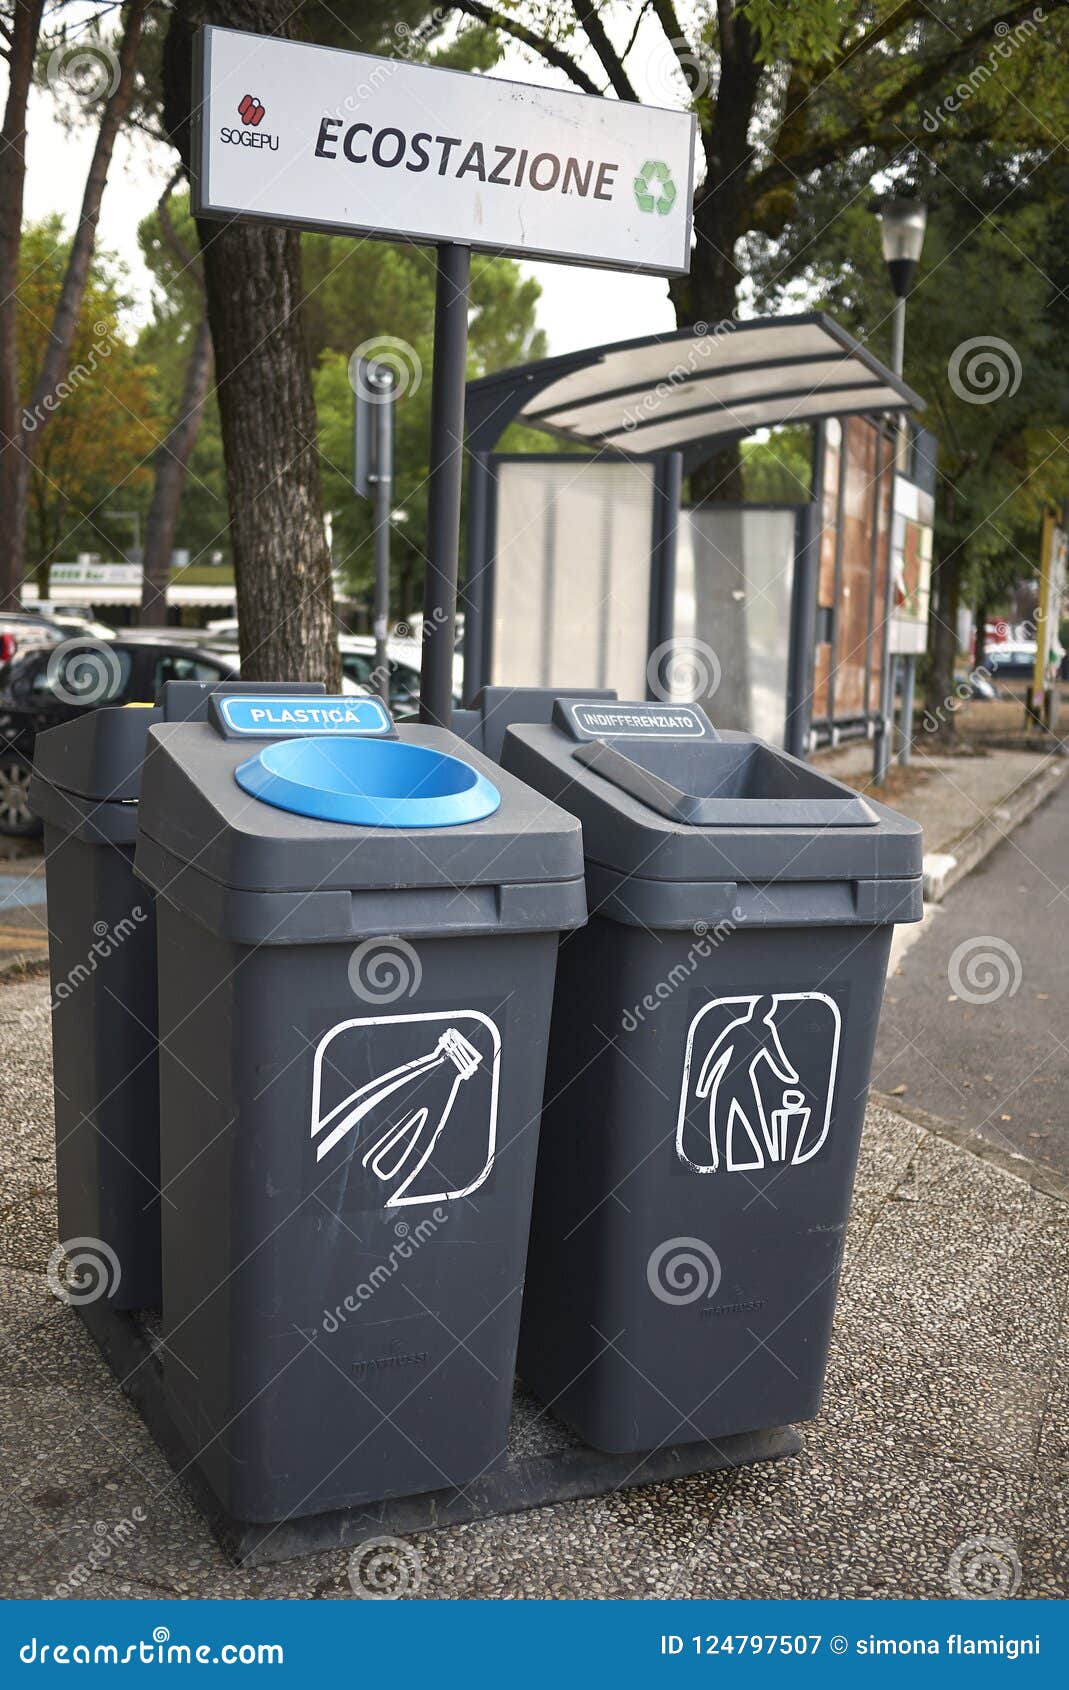 159 Italy Recycling Bins Photos - Free Royalty-free Stock Photos From Dreamstime